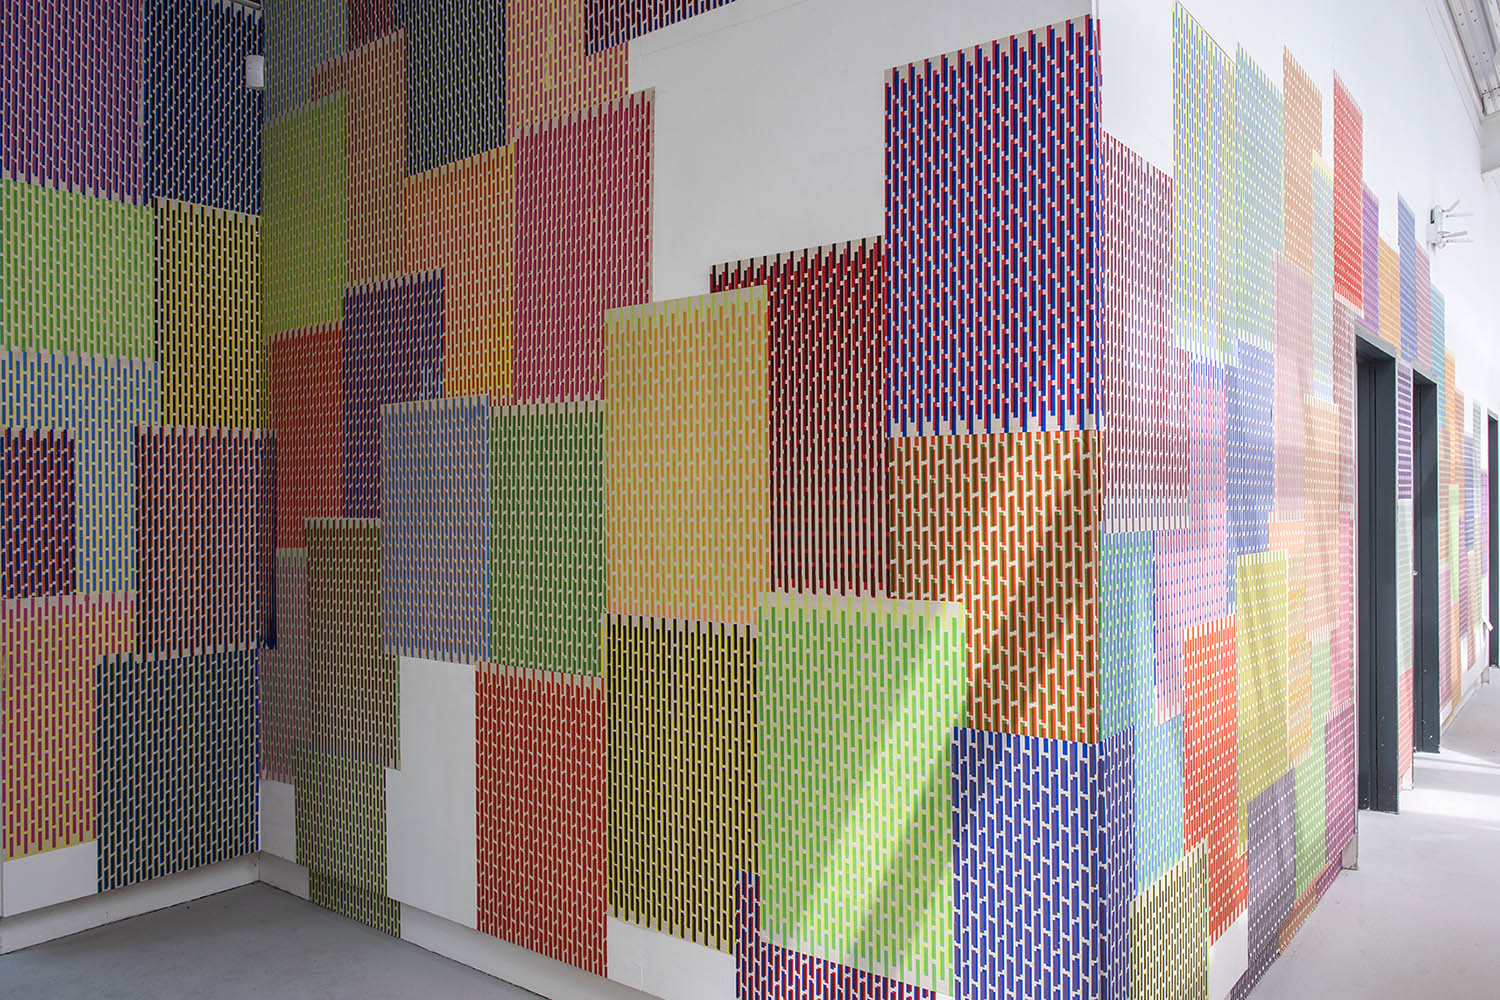 An colorful art installation